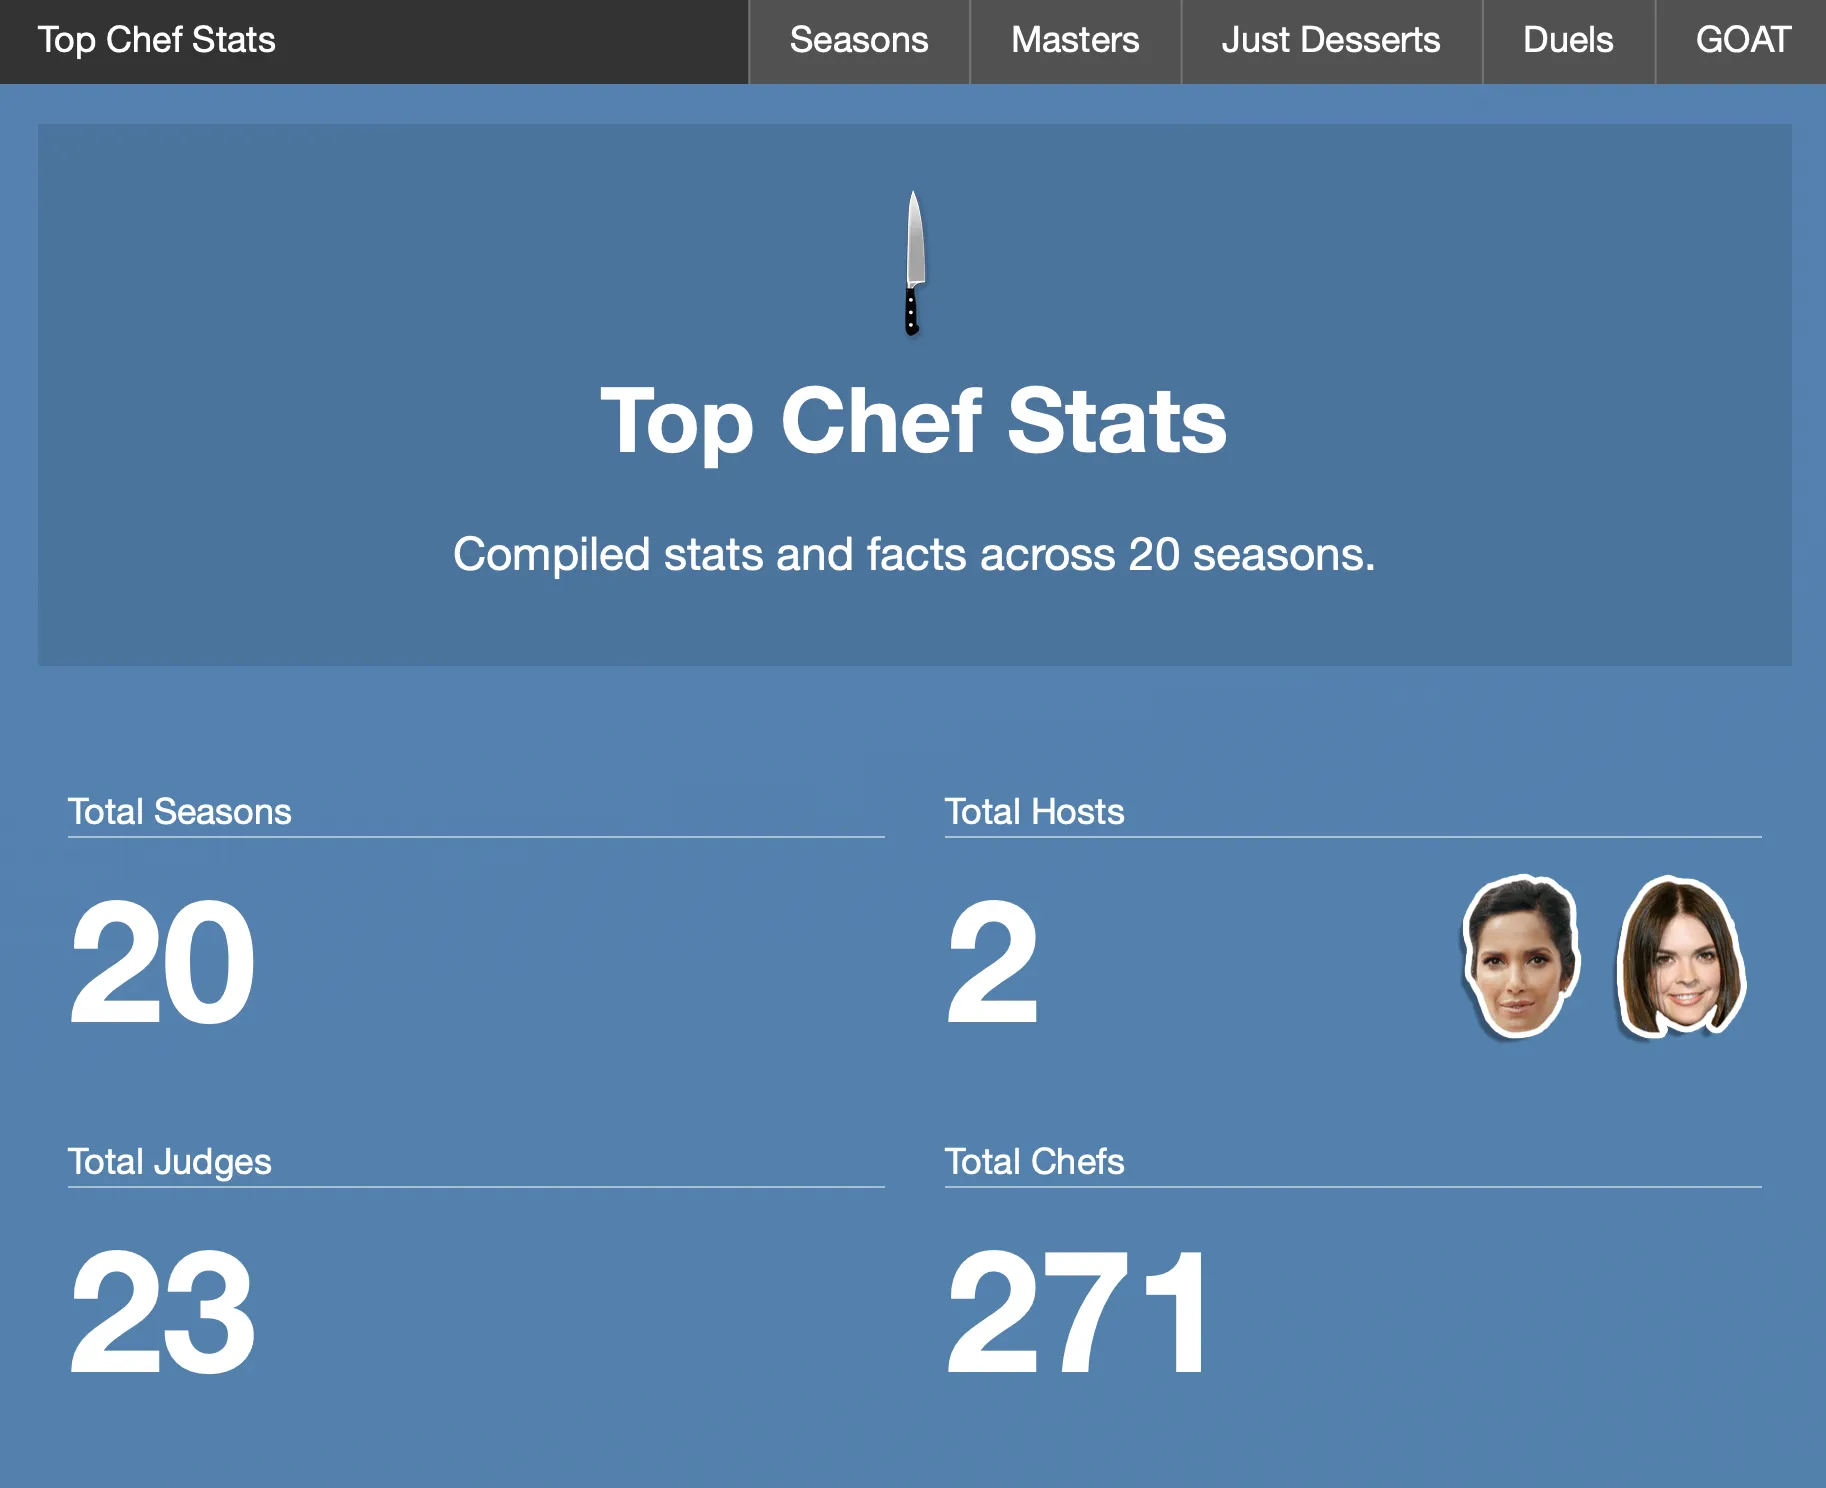 Top Chef Stats